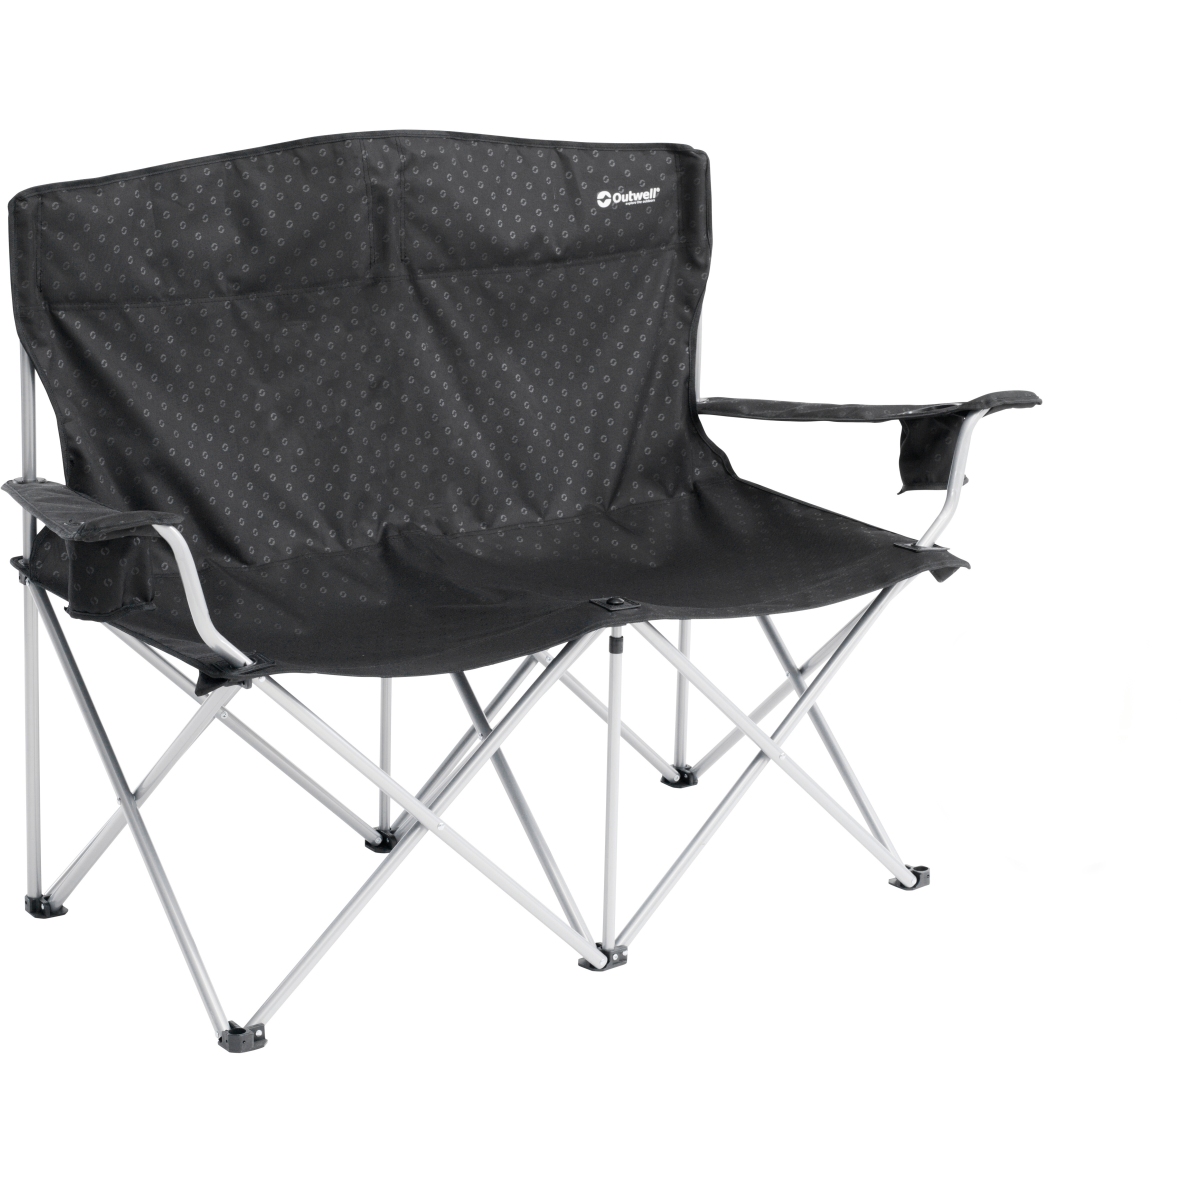 Picture of Outwell Catamarca Sofa Double Camping Chair - Black